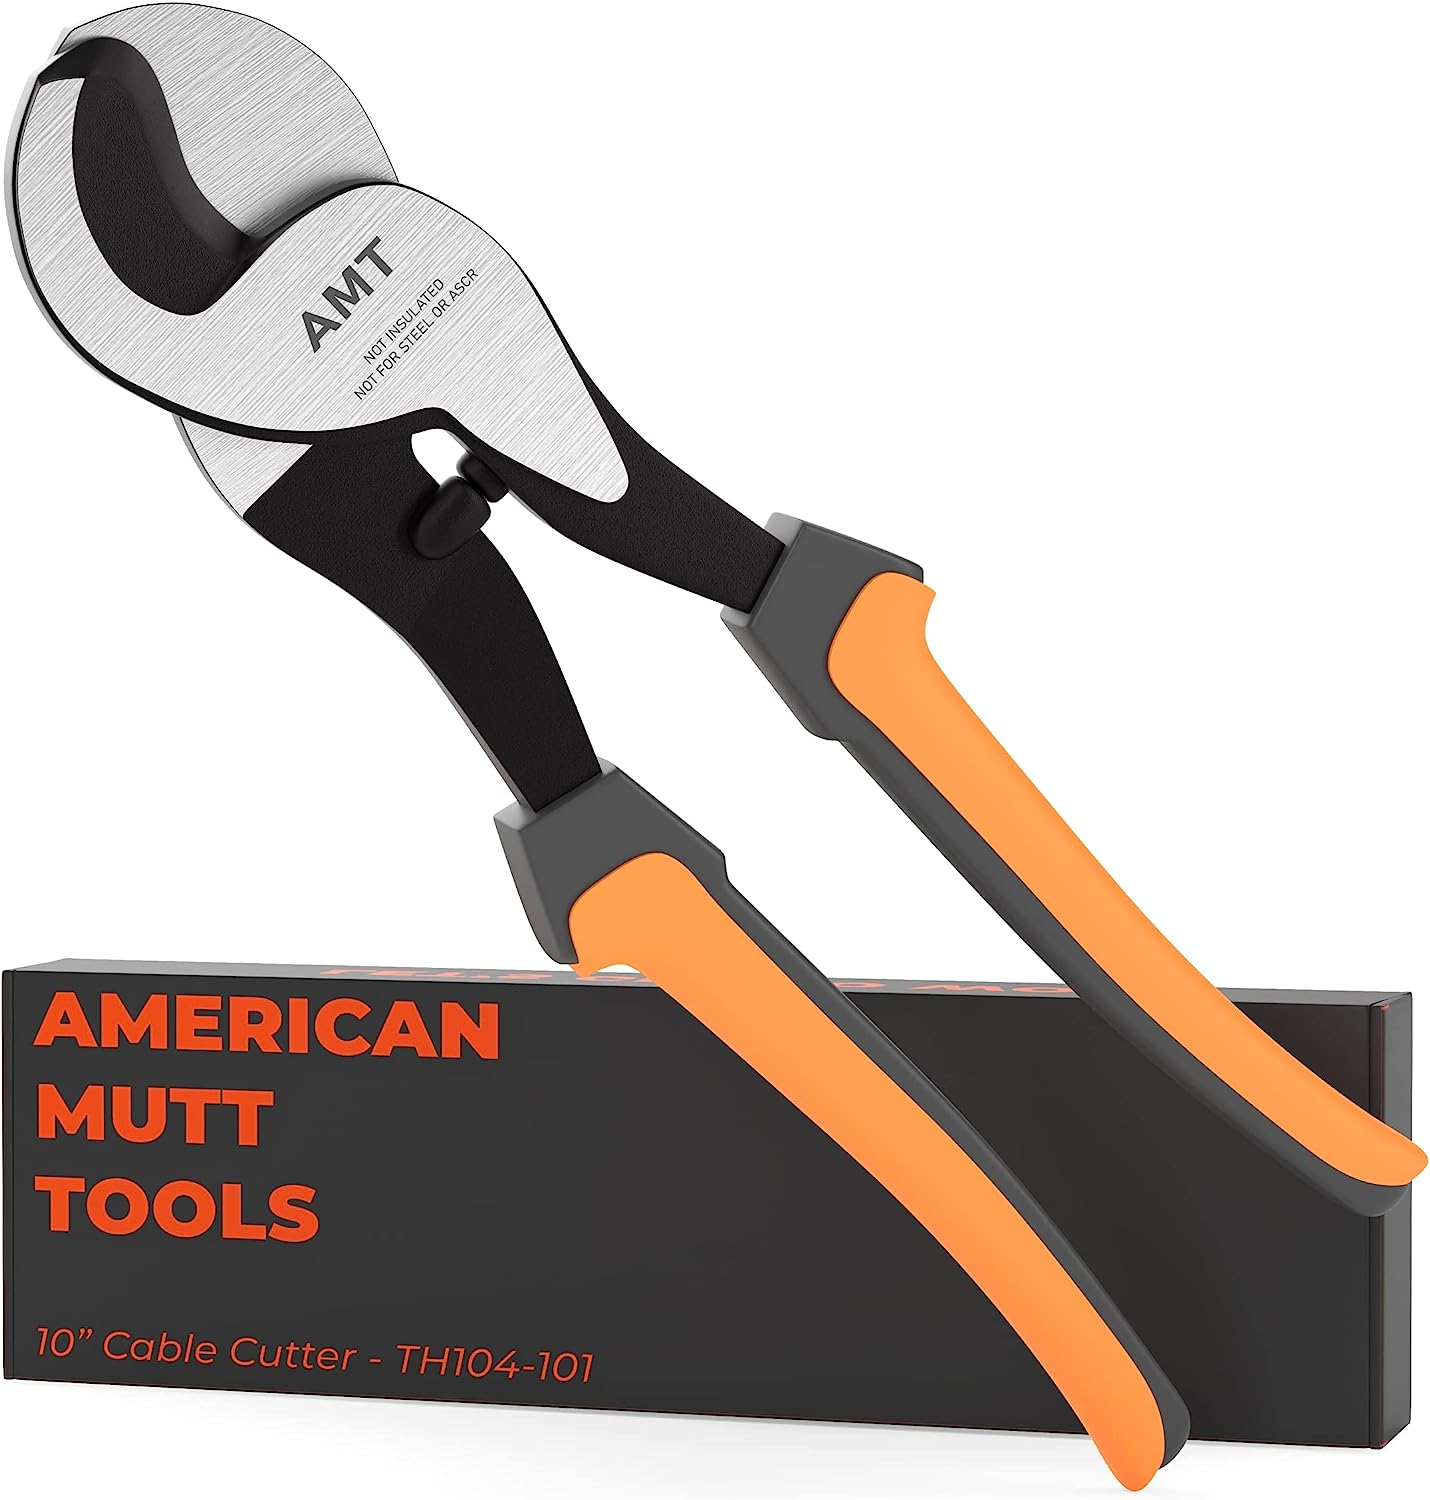 AMERICAN MUTT TOOLS 10 Inch Cable Cutters Heavy Duty [...]